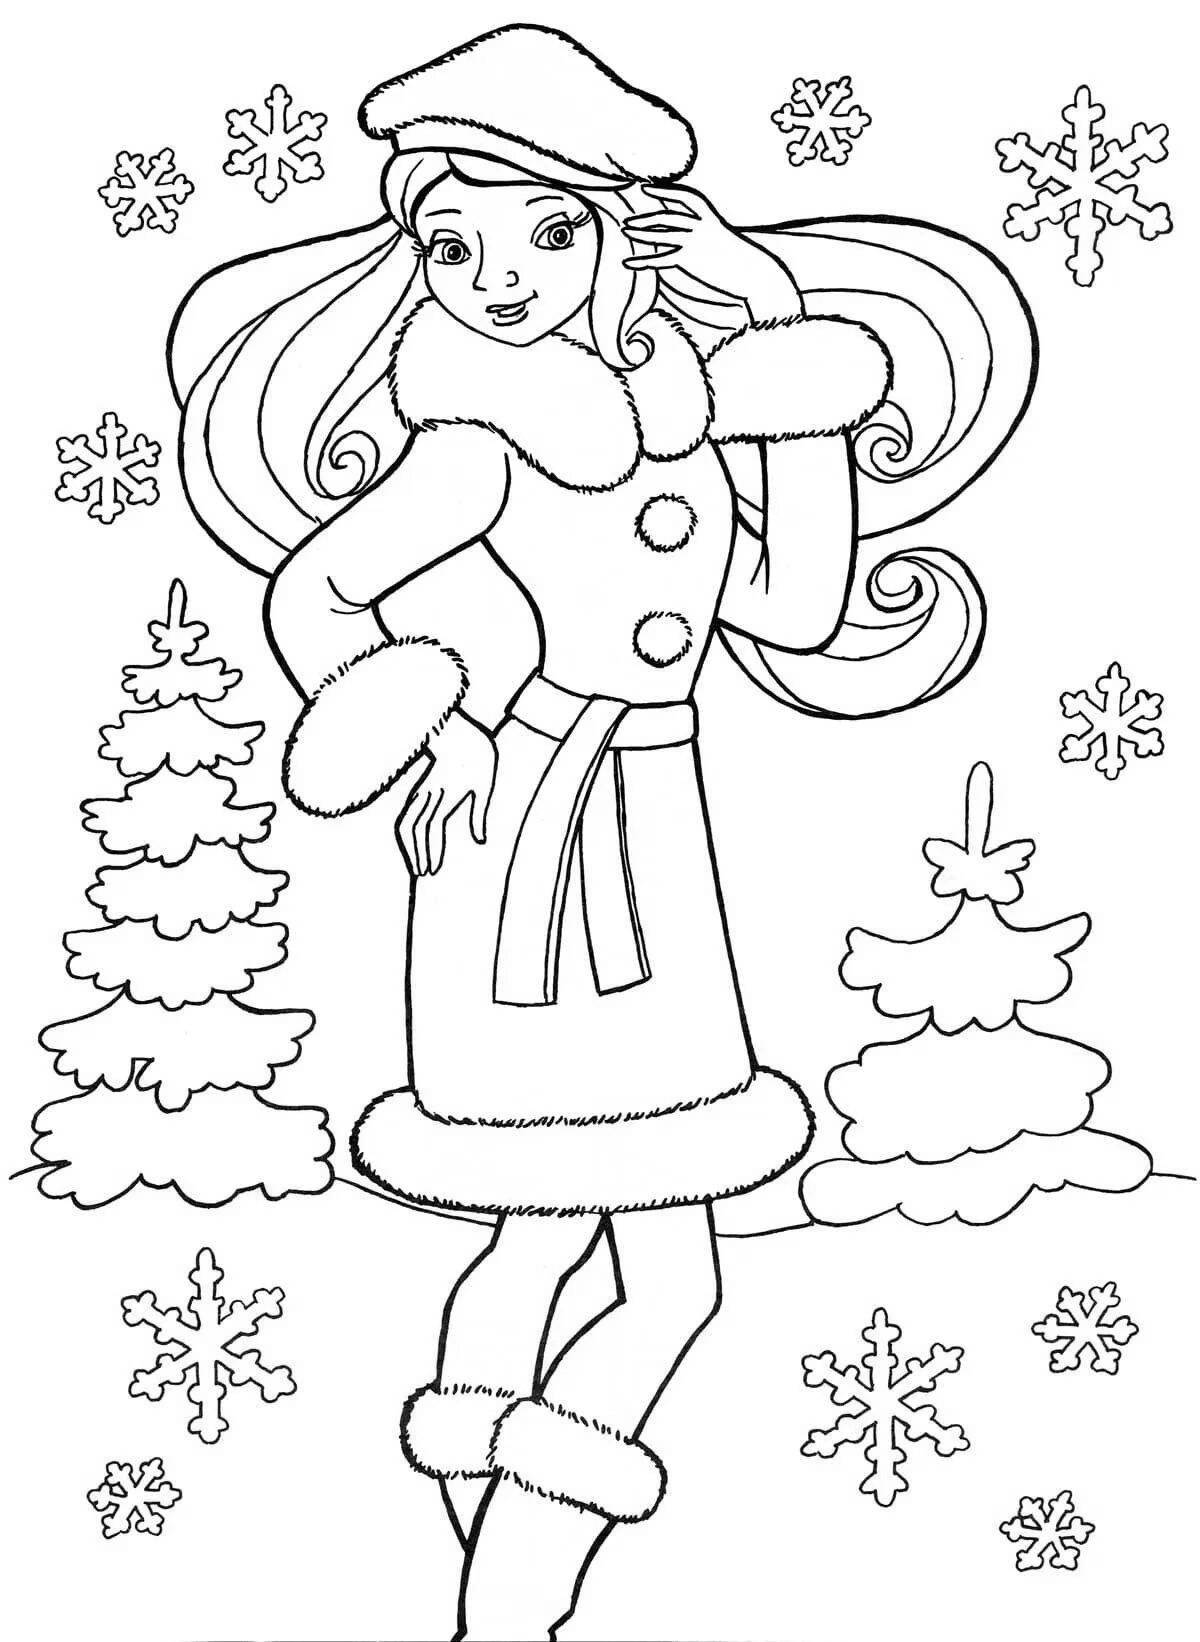 Cheerful coloring of the snow maiden